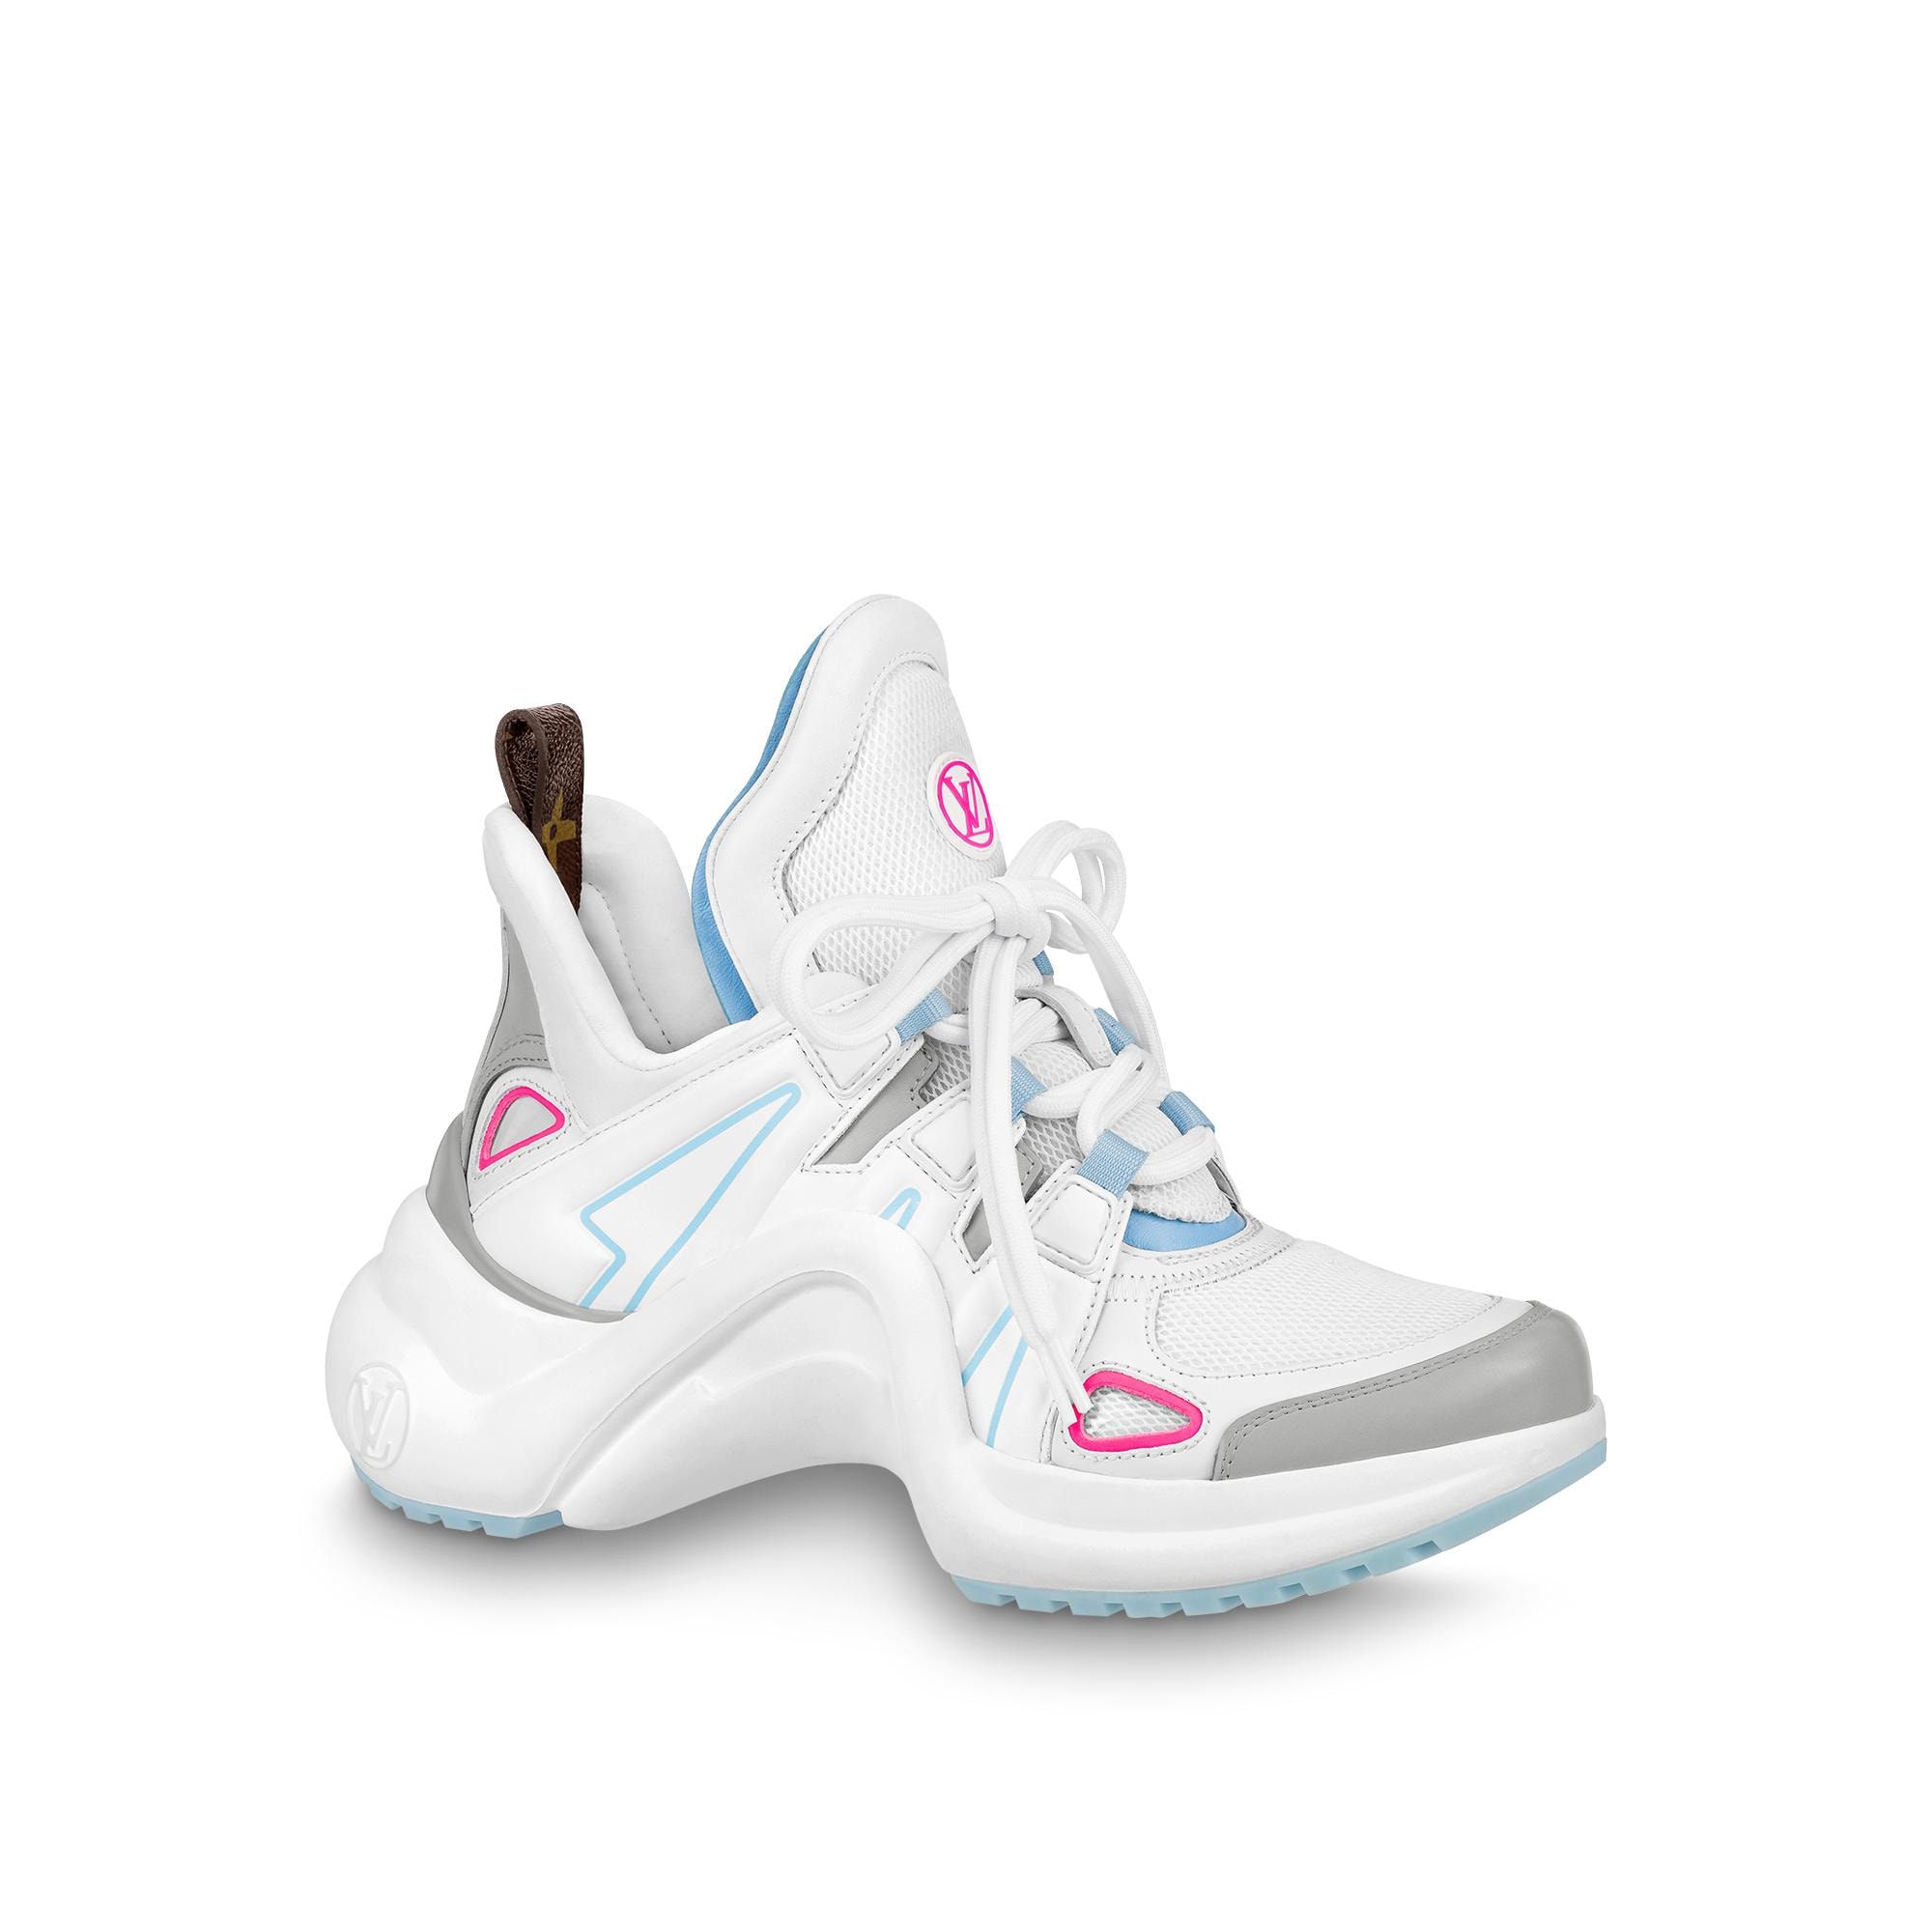 Qismat Women Color blocked with LV Design Shoes Sneakers in White,Pink,  vlack, Blue Colors